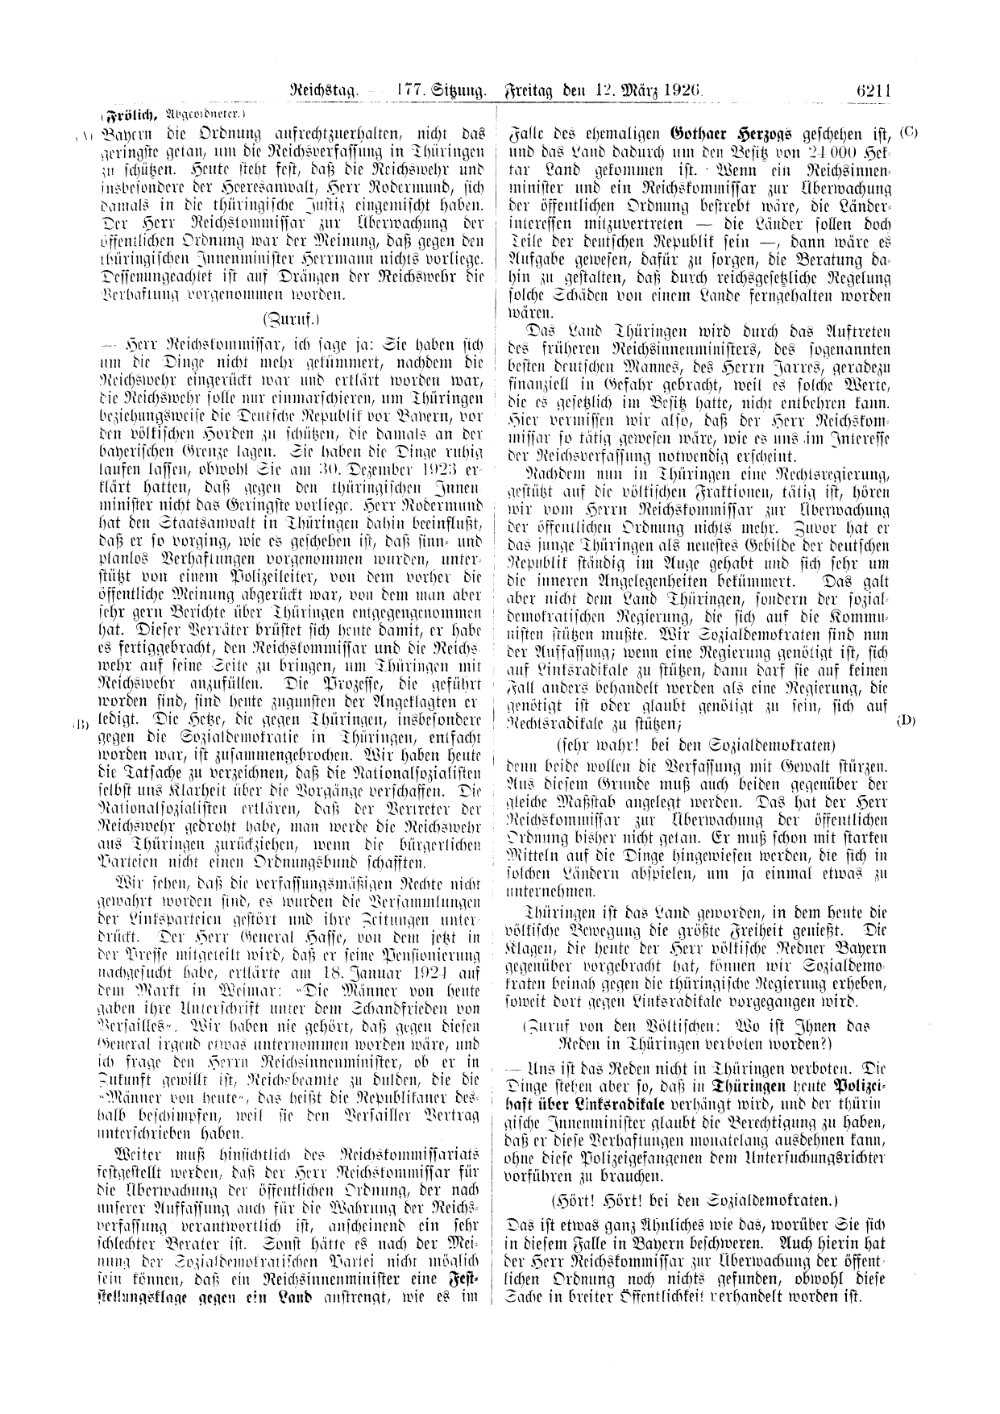 Scan of page 6211